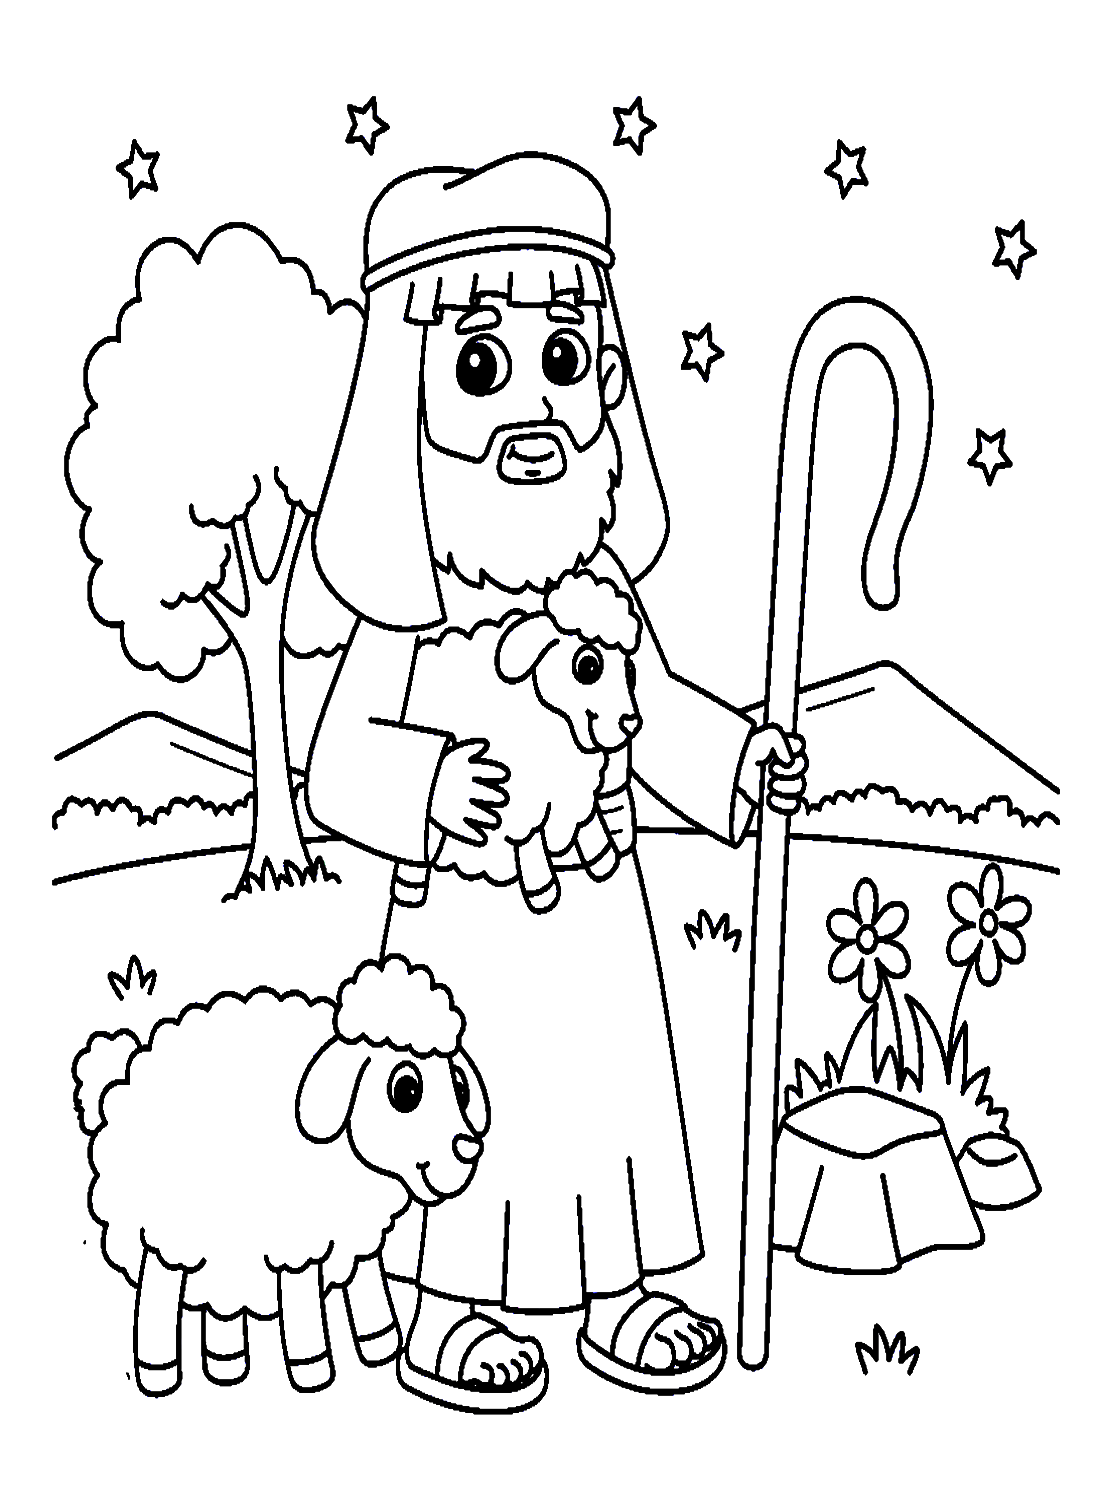 Christian Shepherd With Lambs from Lamb